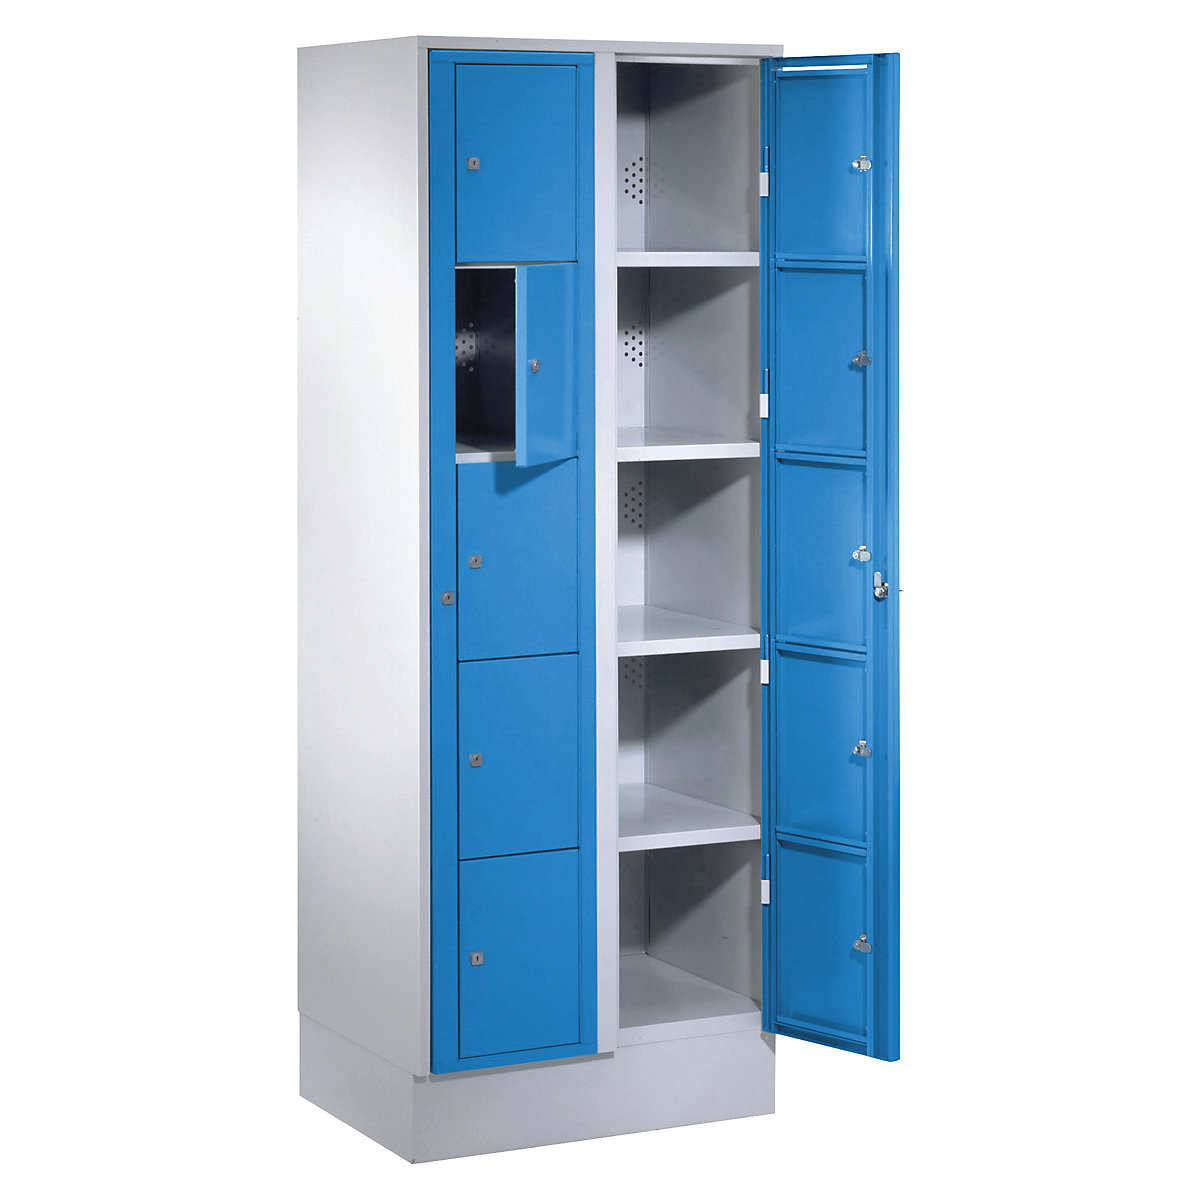 Laundry cabinet – Wolf, HxWxD 1800 x 700 x 500 mm, 10 compartments, light grey / light blue-12